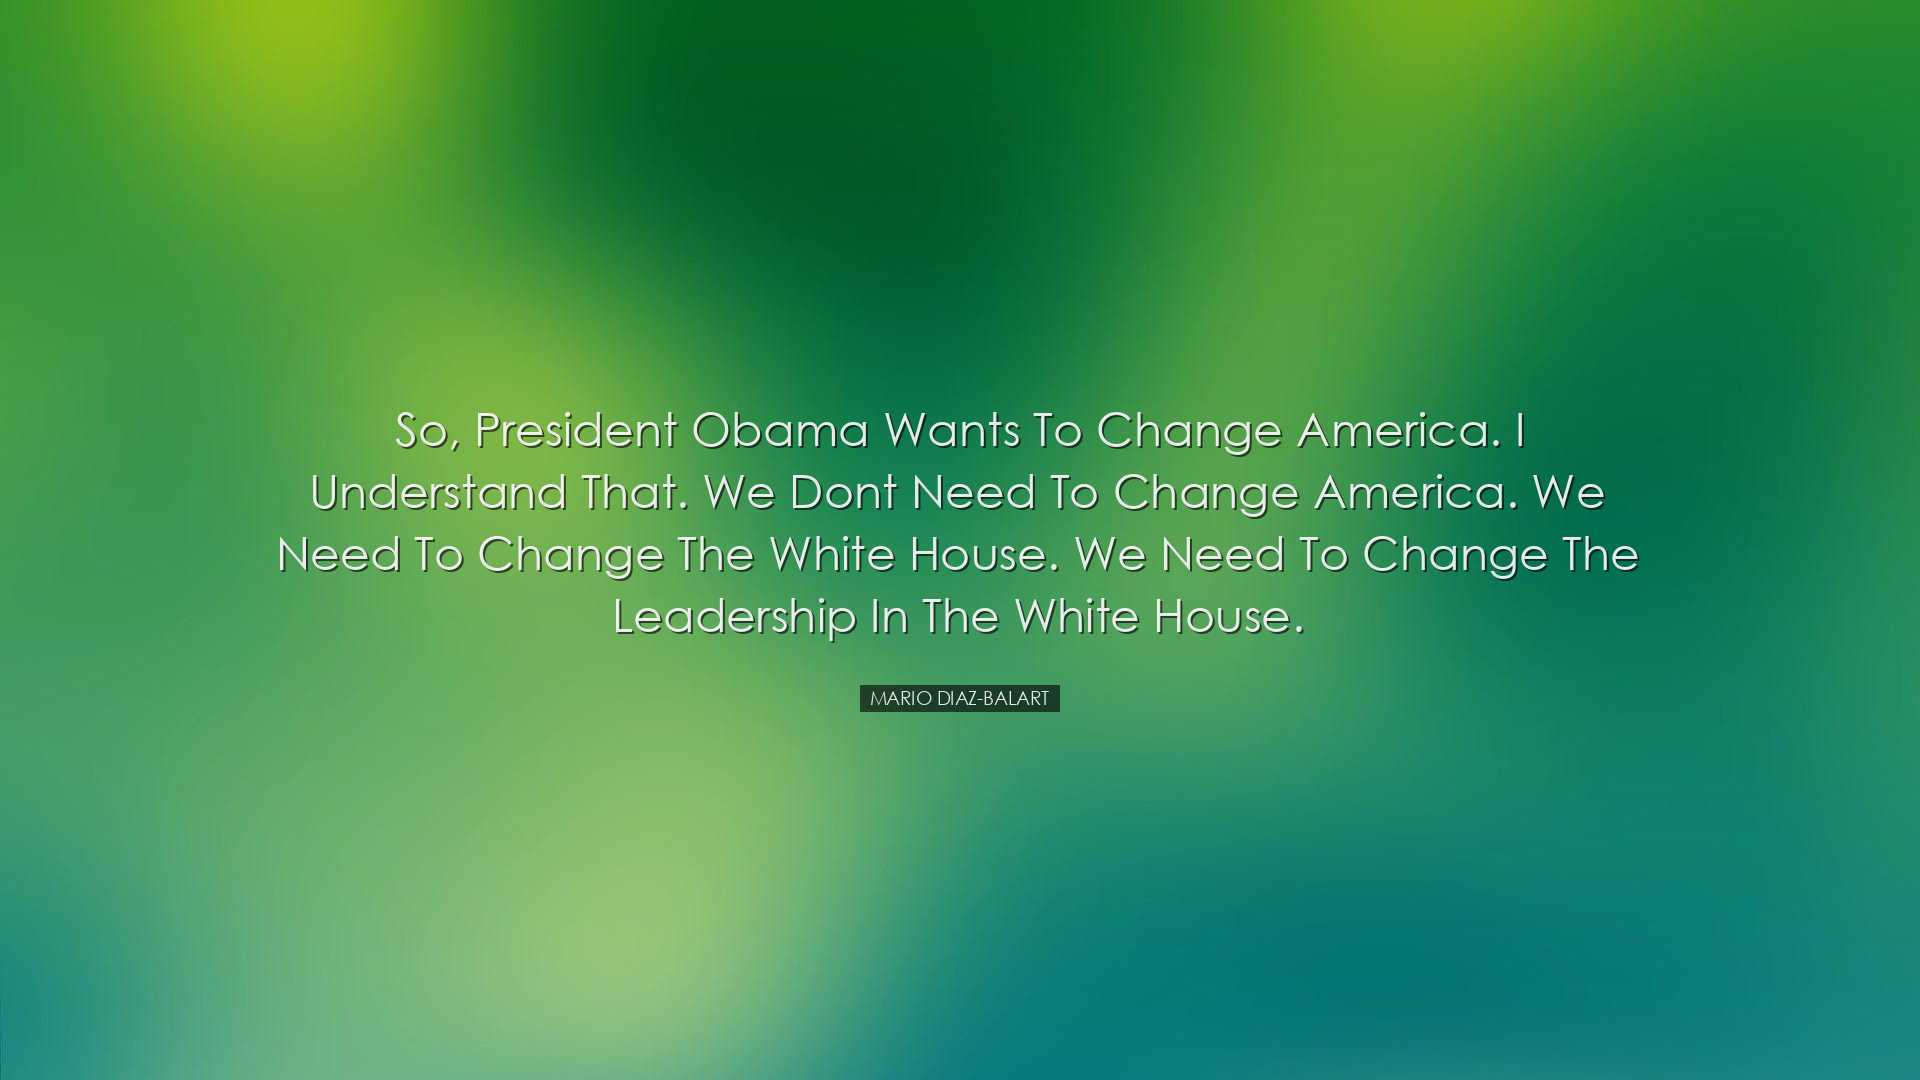 So, President Obama wants to change America. I understand that. We